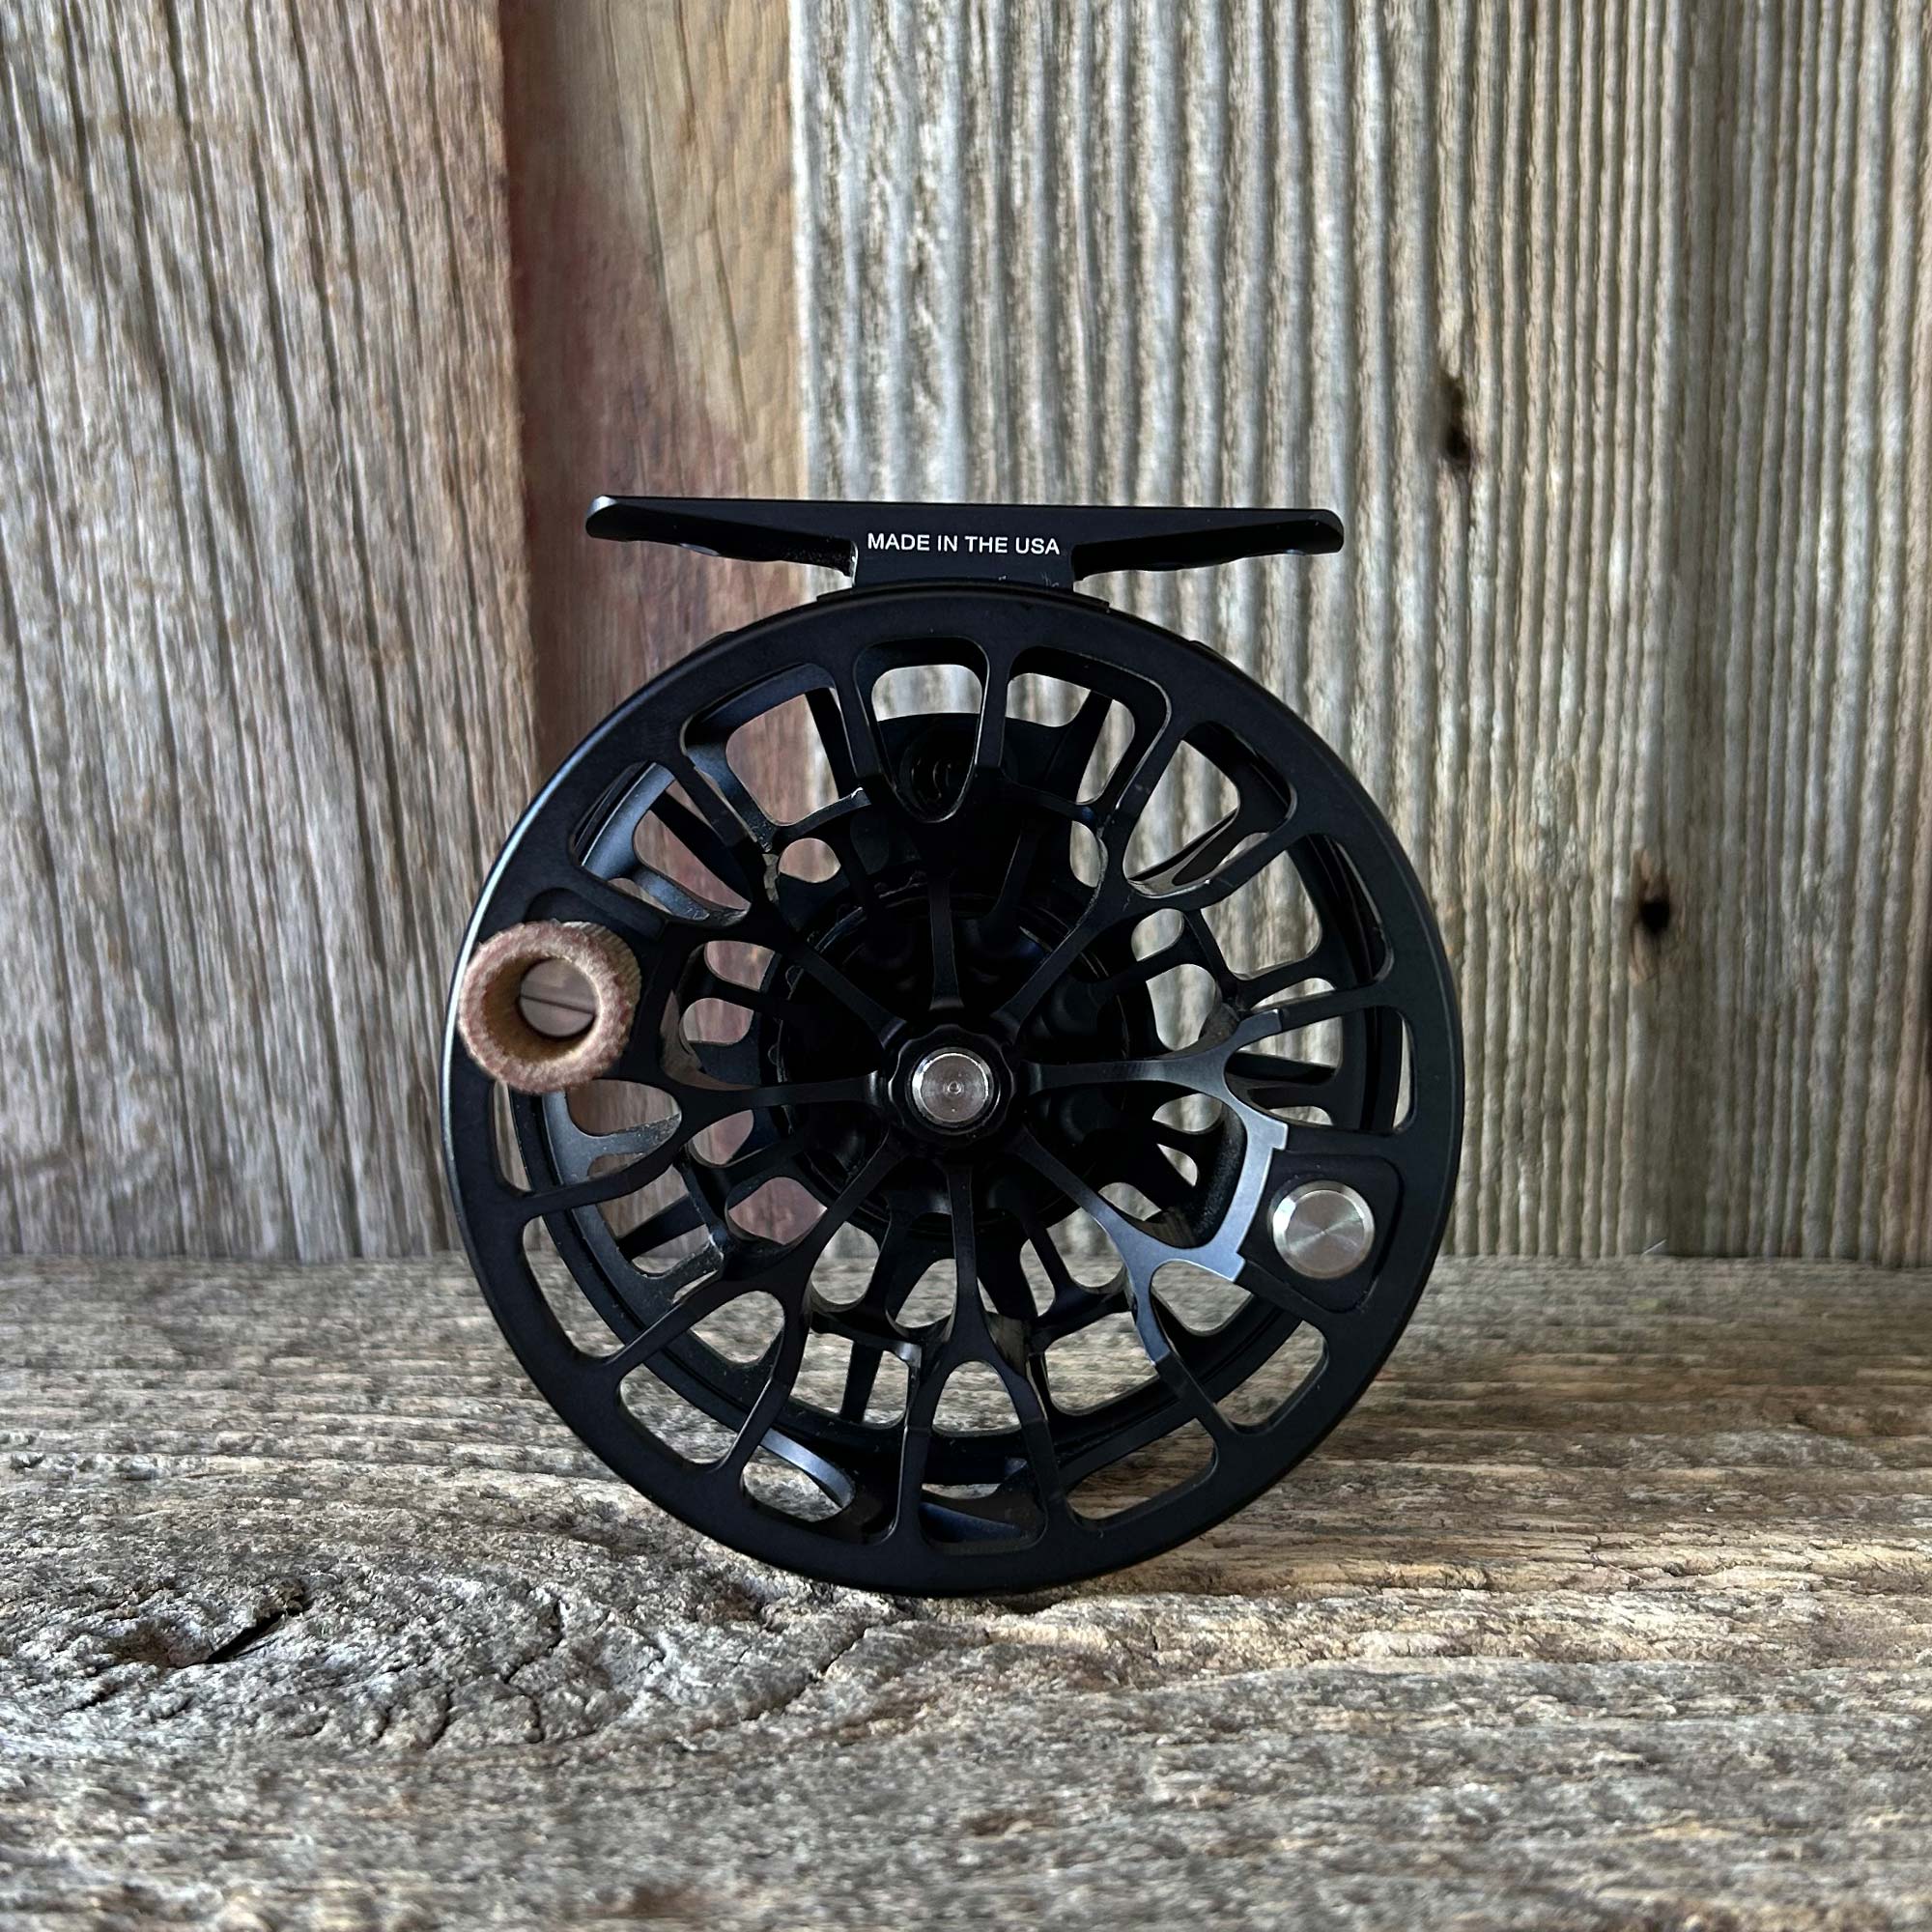 ROSS ANIMAS 7/8 WT FLY REEL MATTE BLACK +FREE $80 FLY LINE, BACKING,  SHIPPING